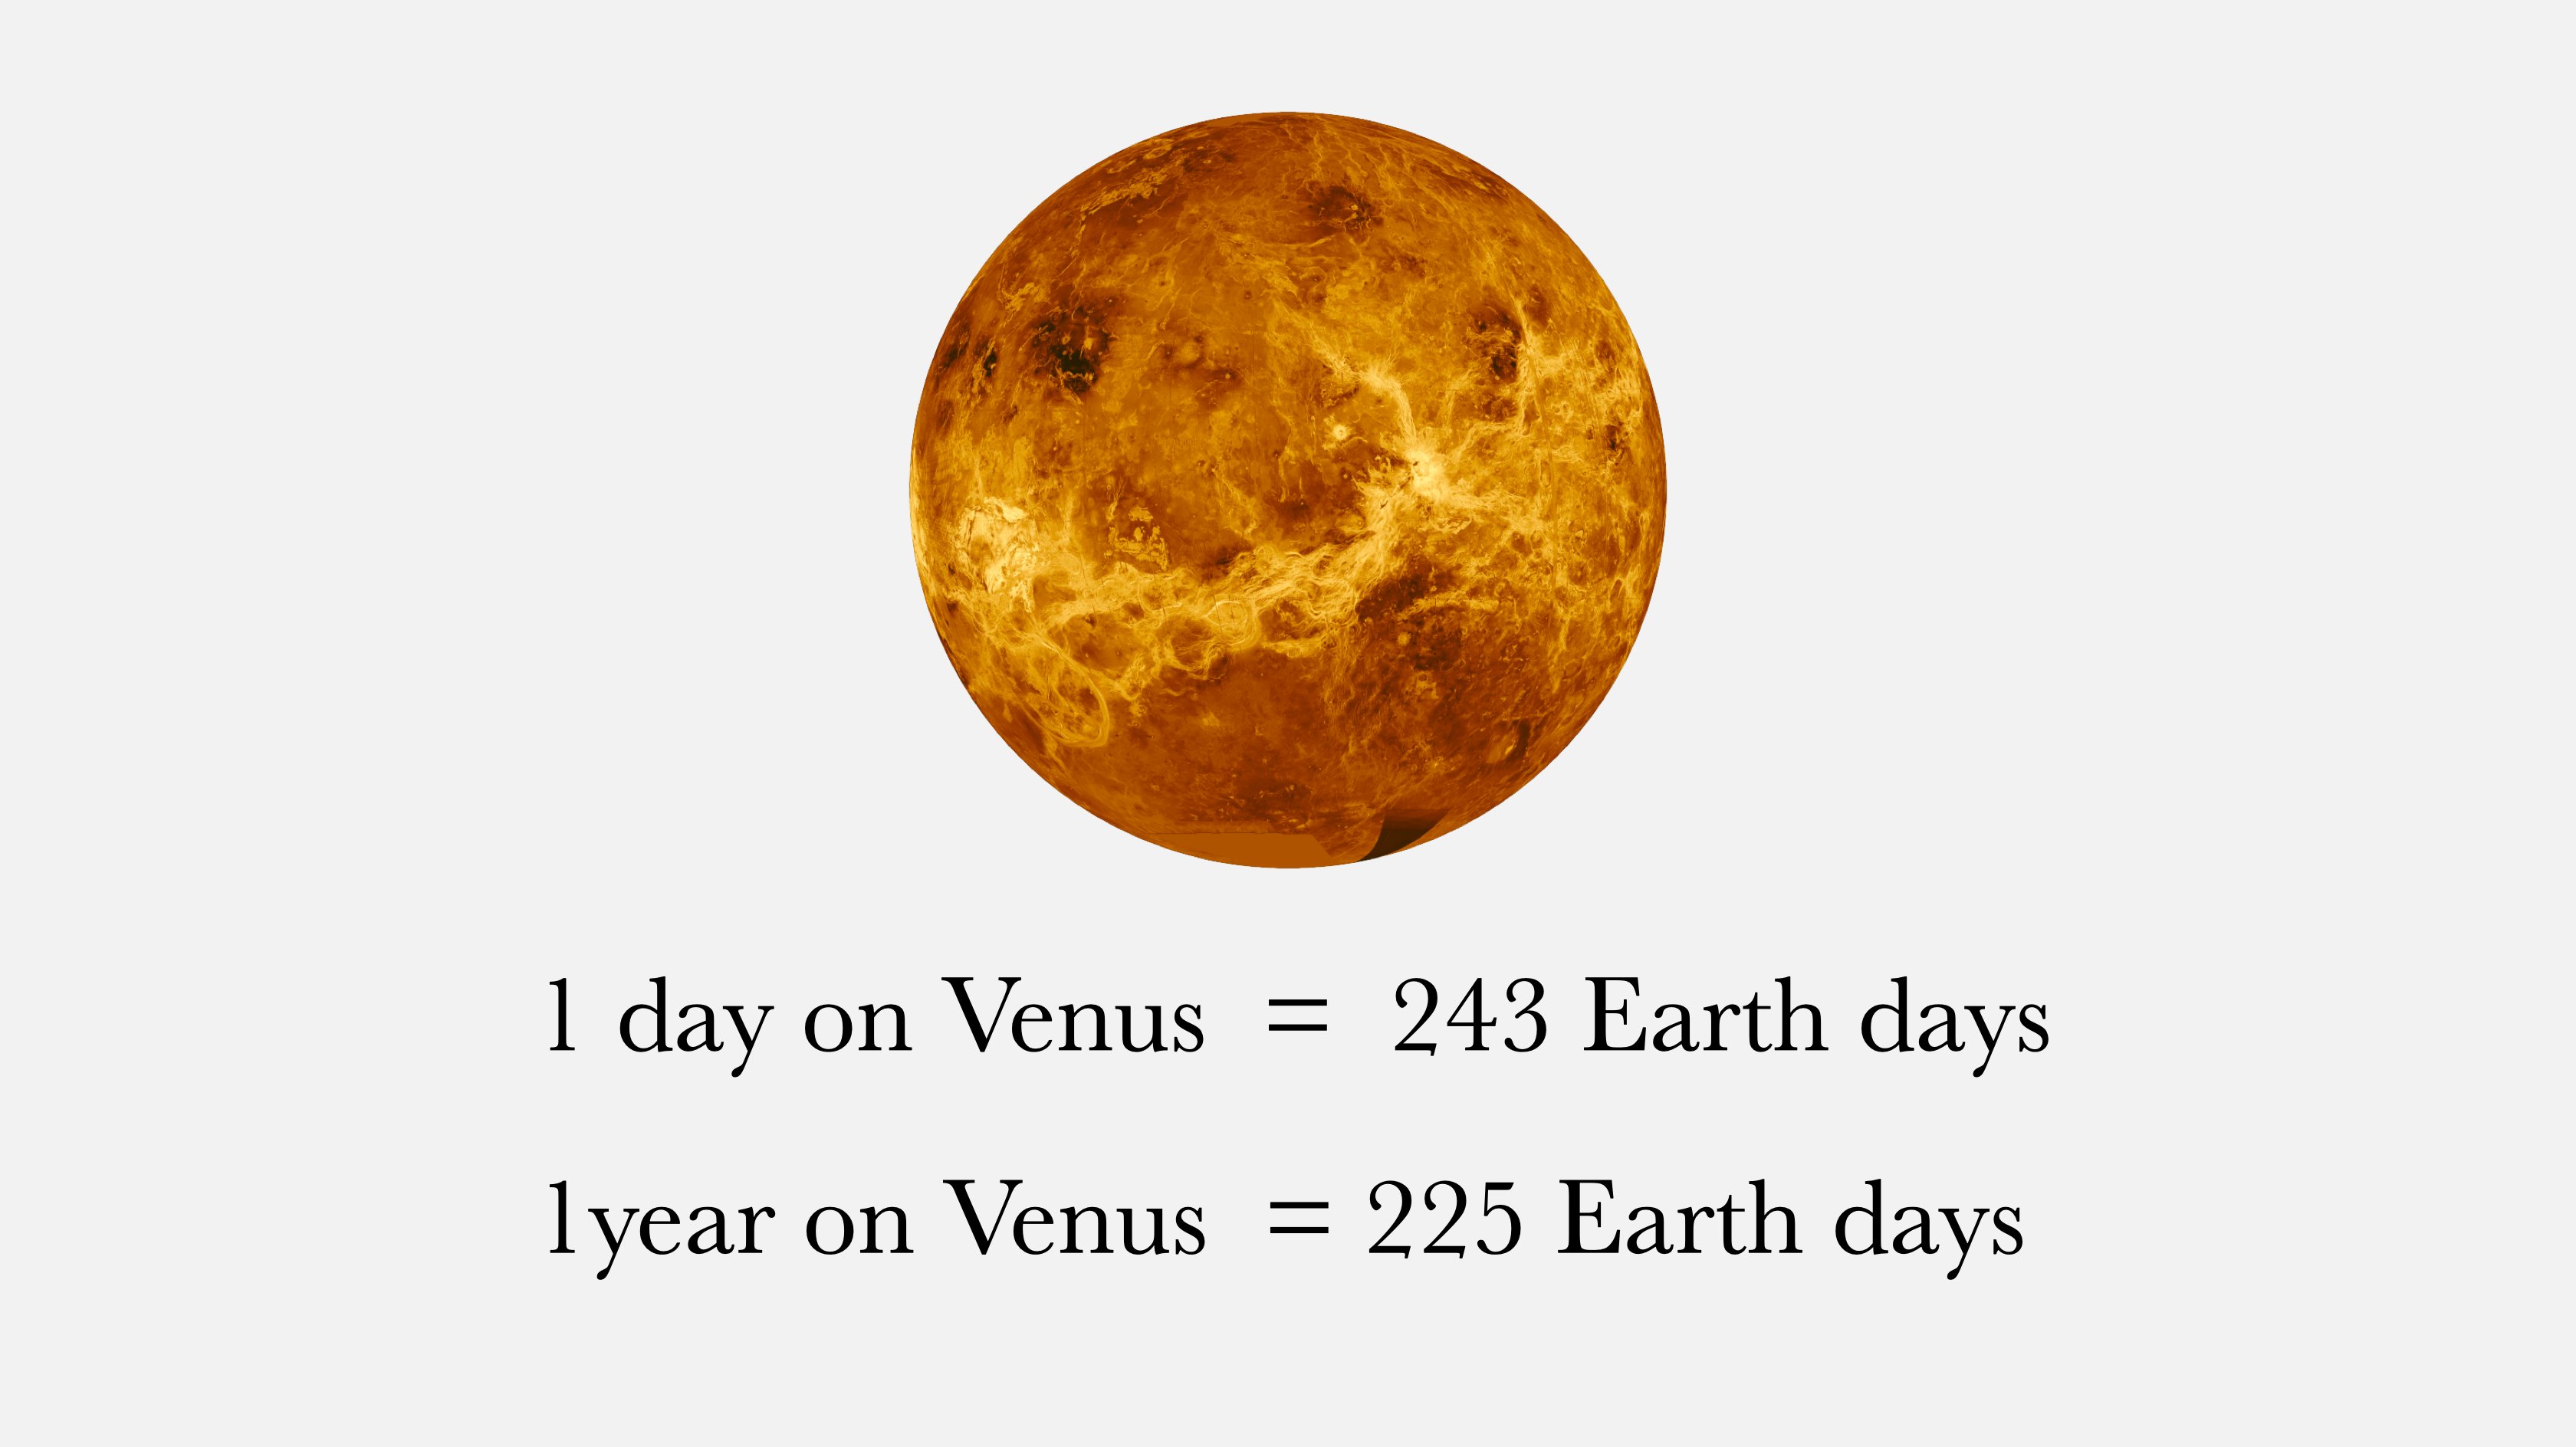 Fermat's Library on Twitter: "FUN FACT: The planet Venus a rotation period of 243 Earth days and it orbits the Sun every 225 days. Venus takes longer to rotate about